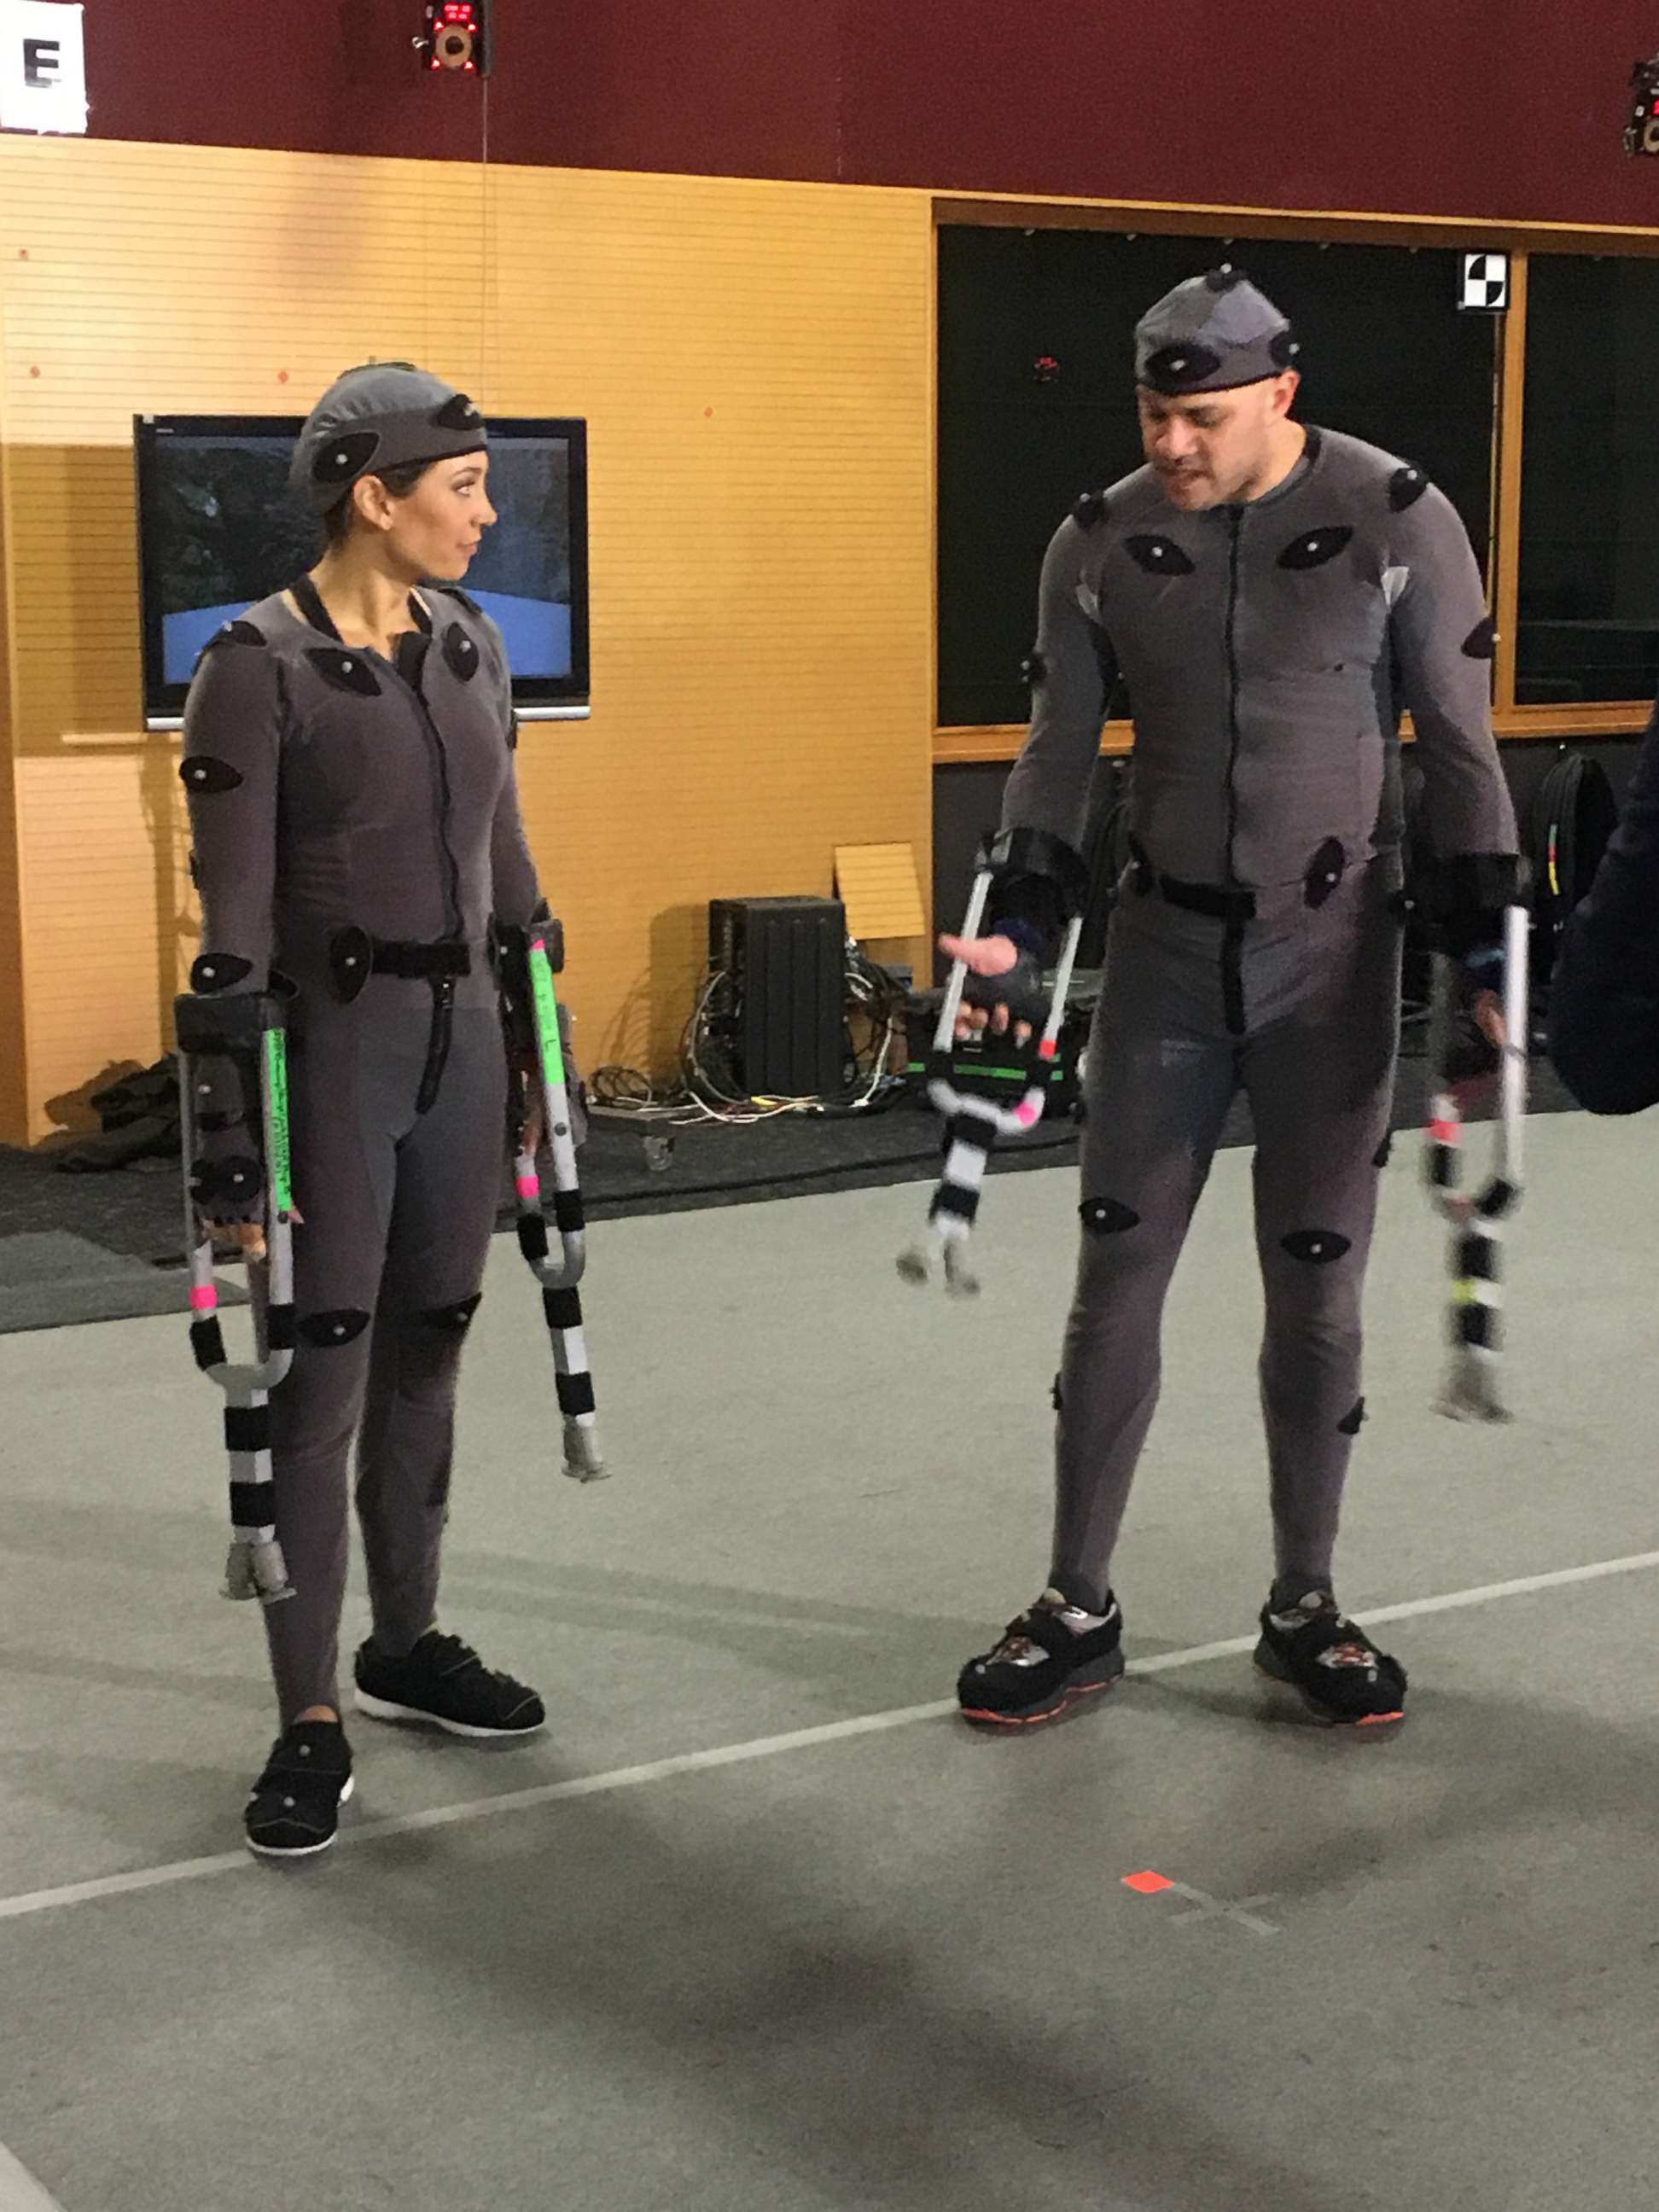 PHOTO: ABC News' Ginger Zee experiments with the motion capture technology used to create primates in the "Planet of the Apes" series at Weta Digital, Peter Jackson's the special effects company in Wellington, New Zealand.